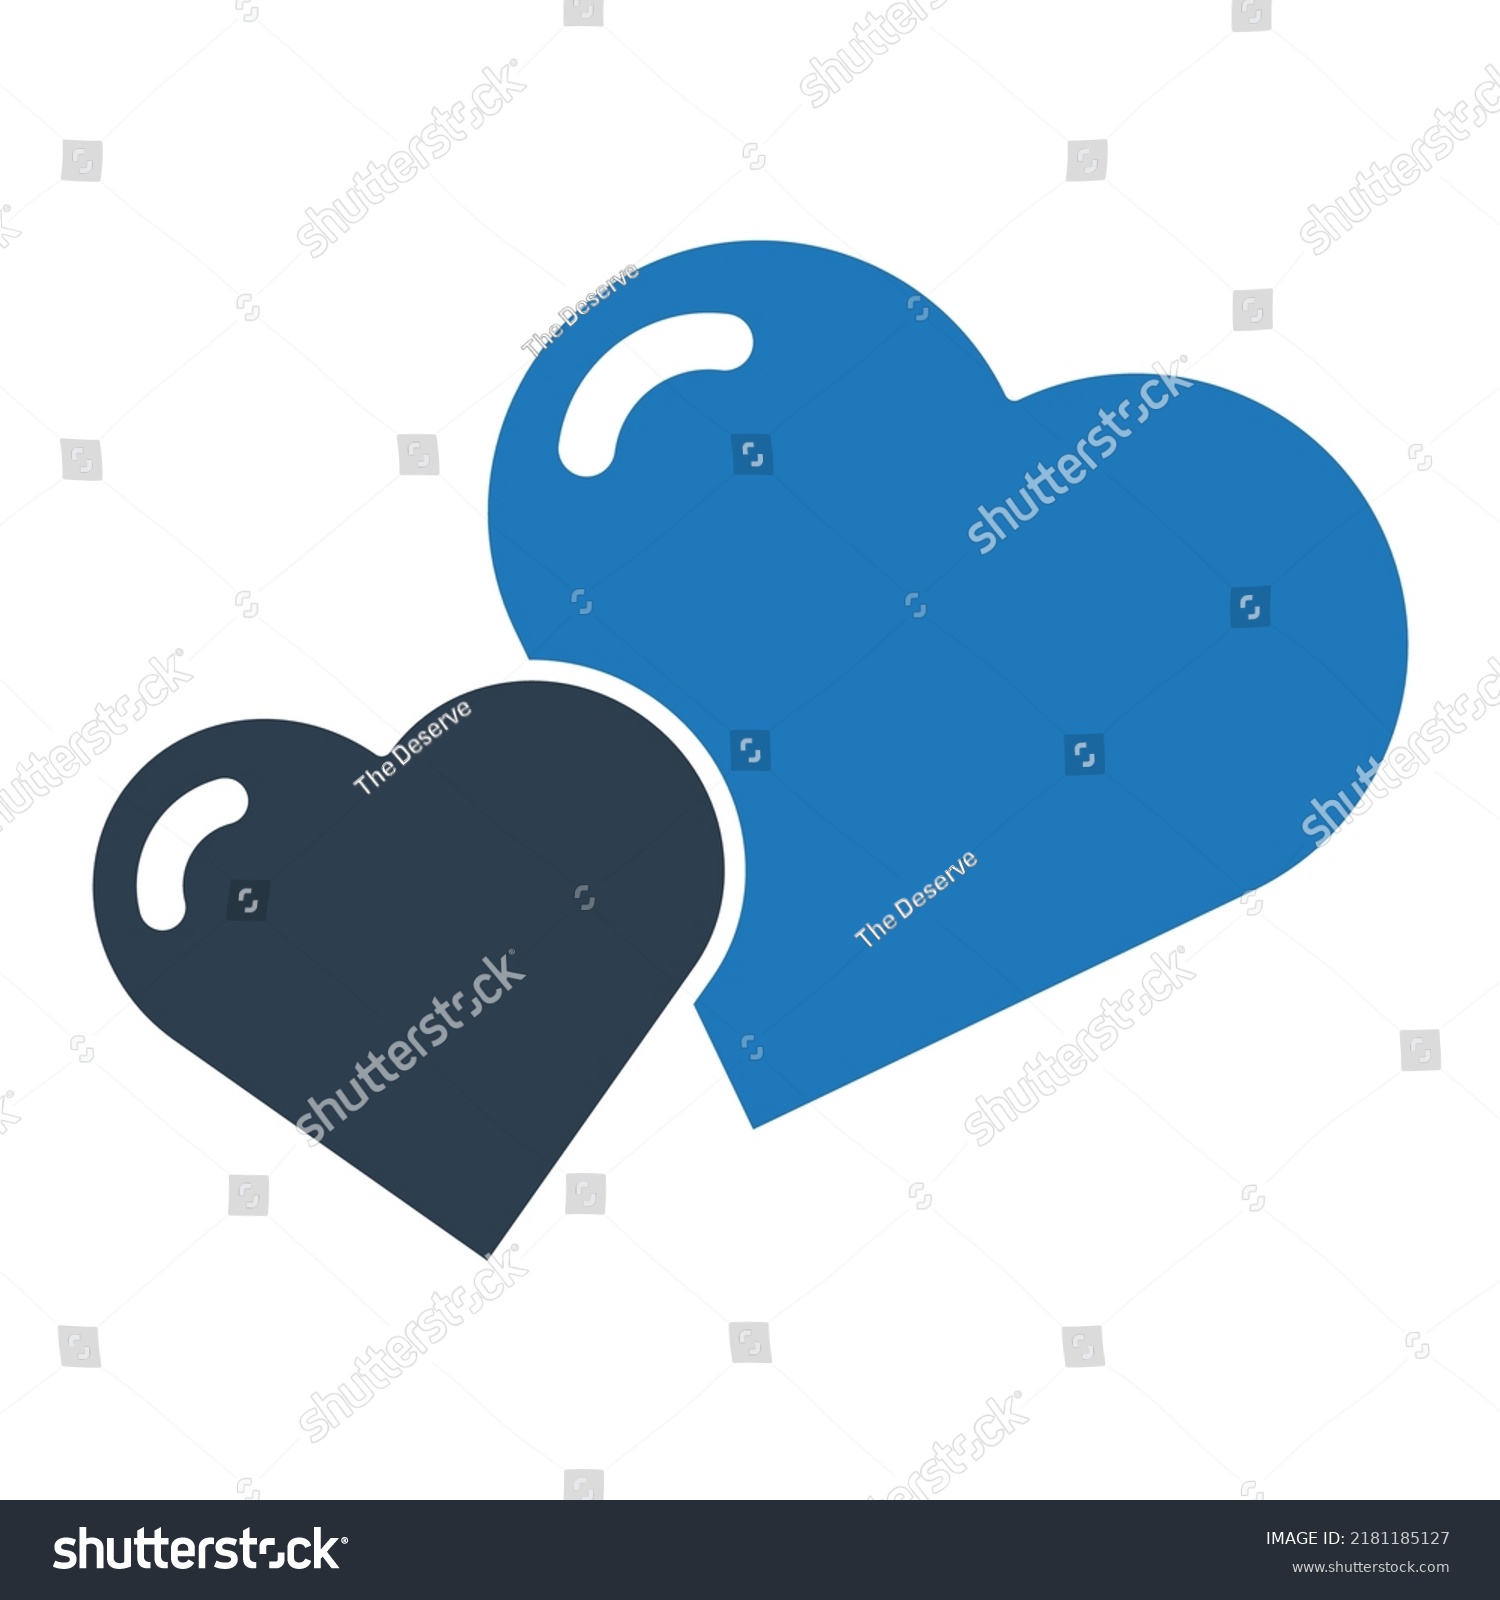 SVG of Double Heart Vector icon which is suitable for commercial work and easily modify or edit it

 svg